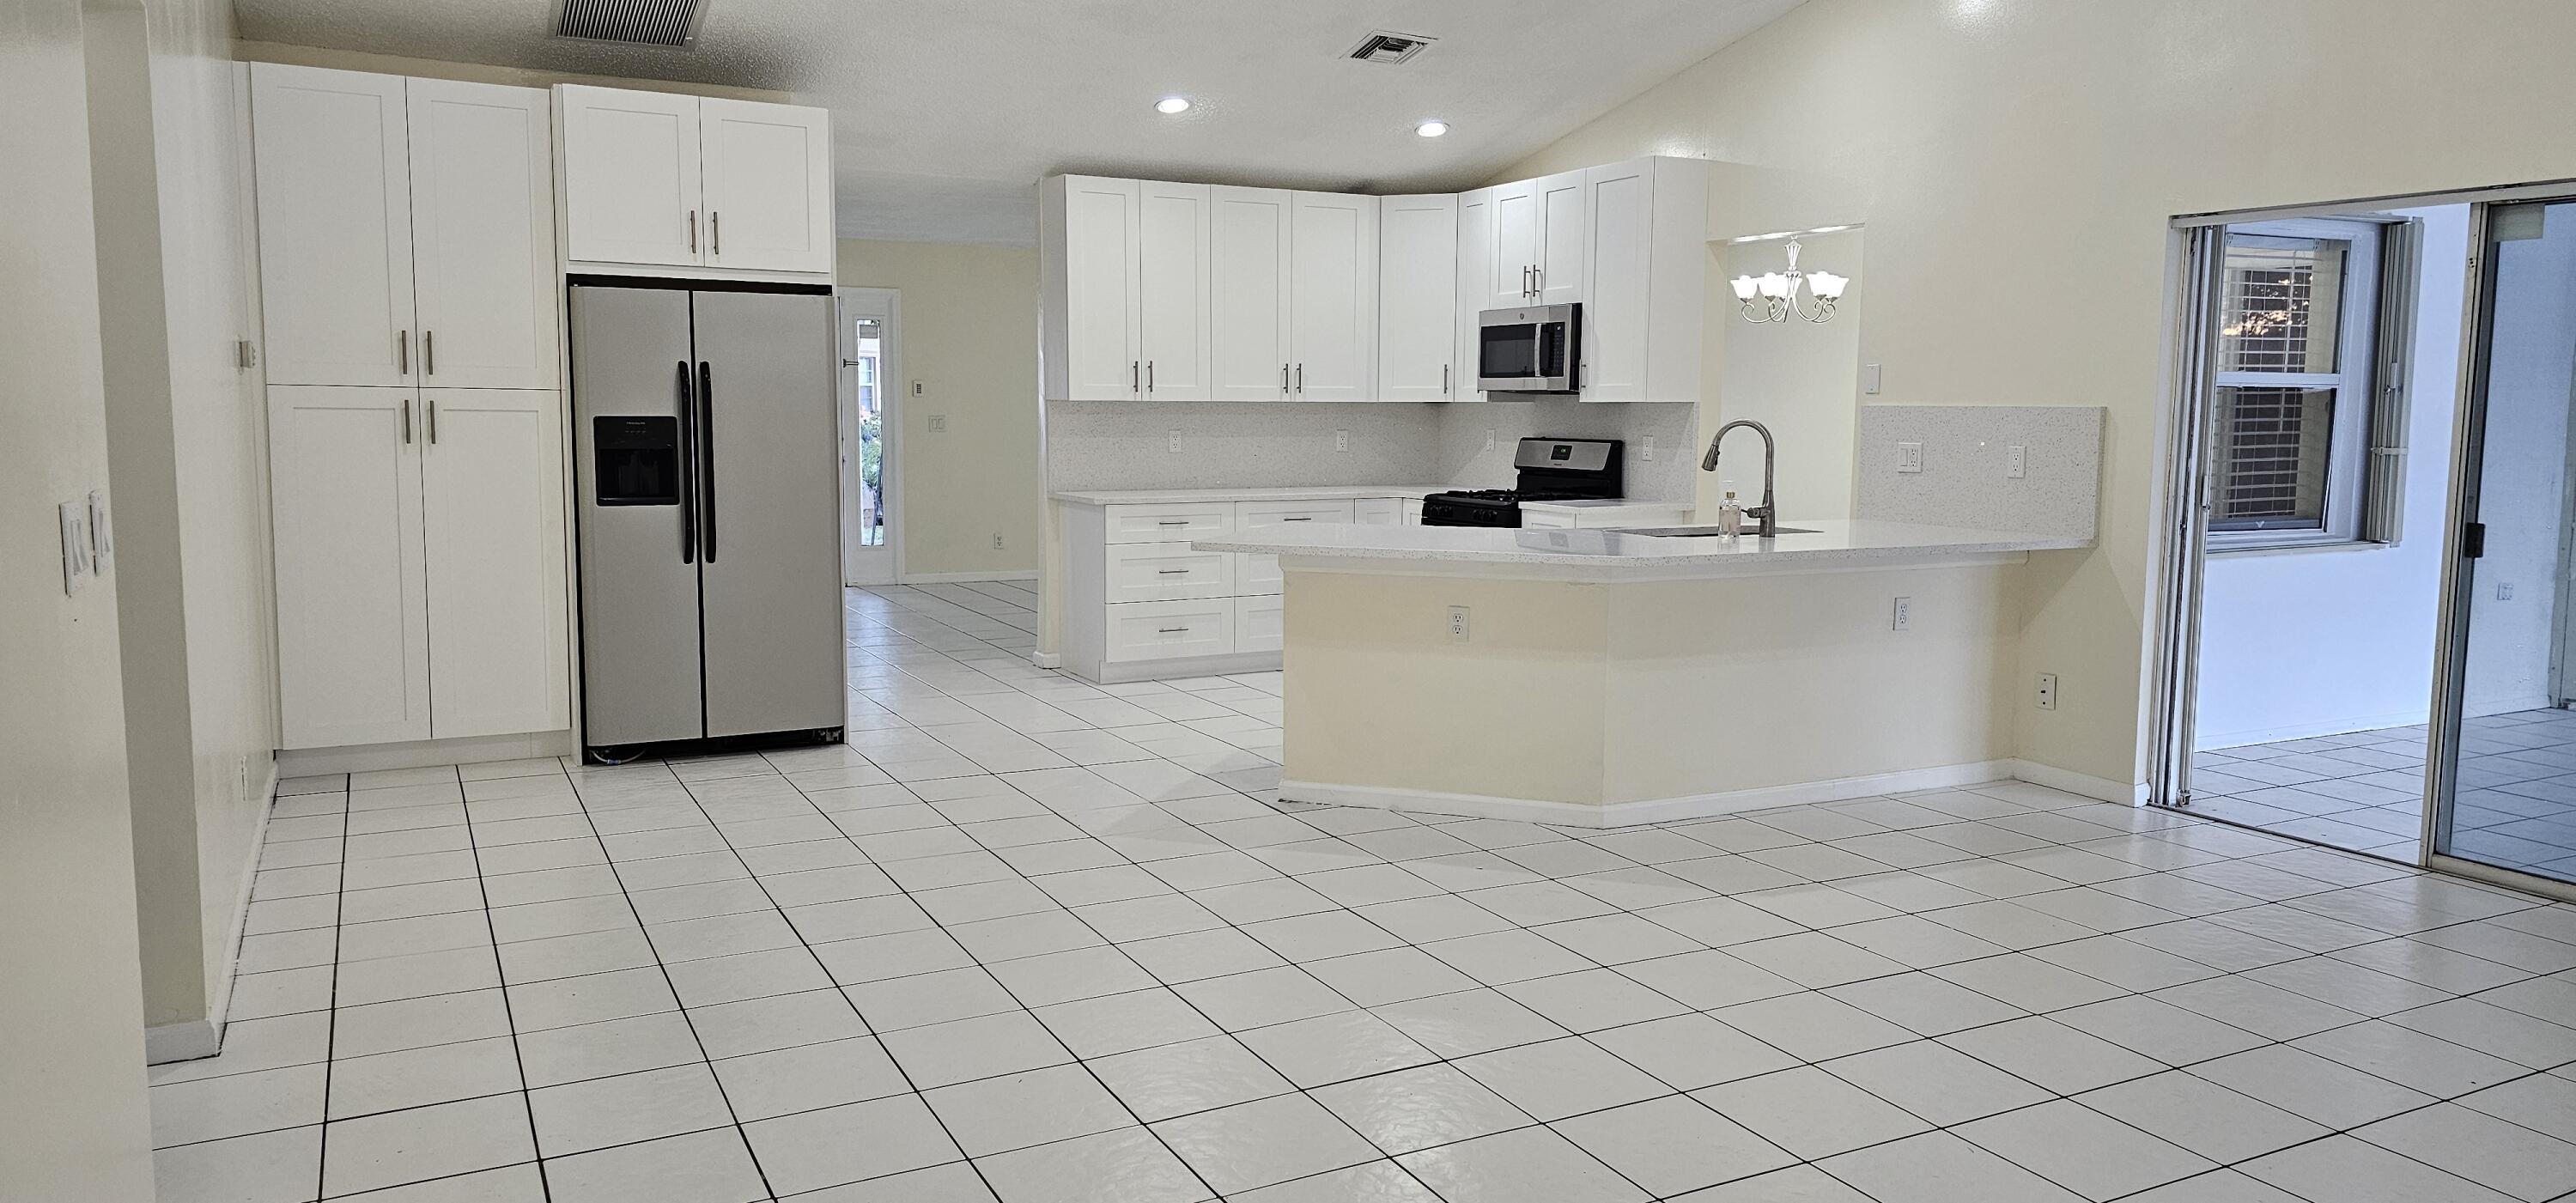 a view of kitchen with stainless steel appliances cabinets and a refrigerator